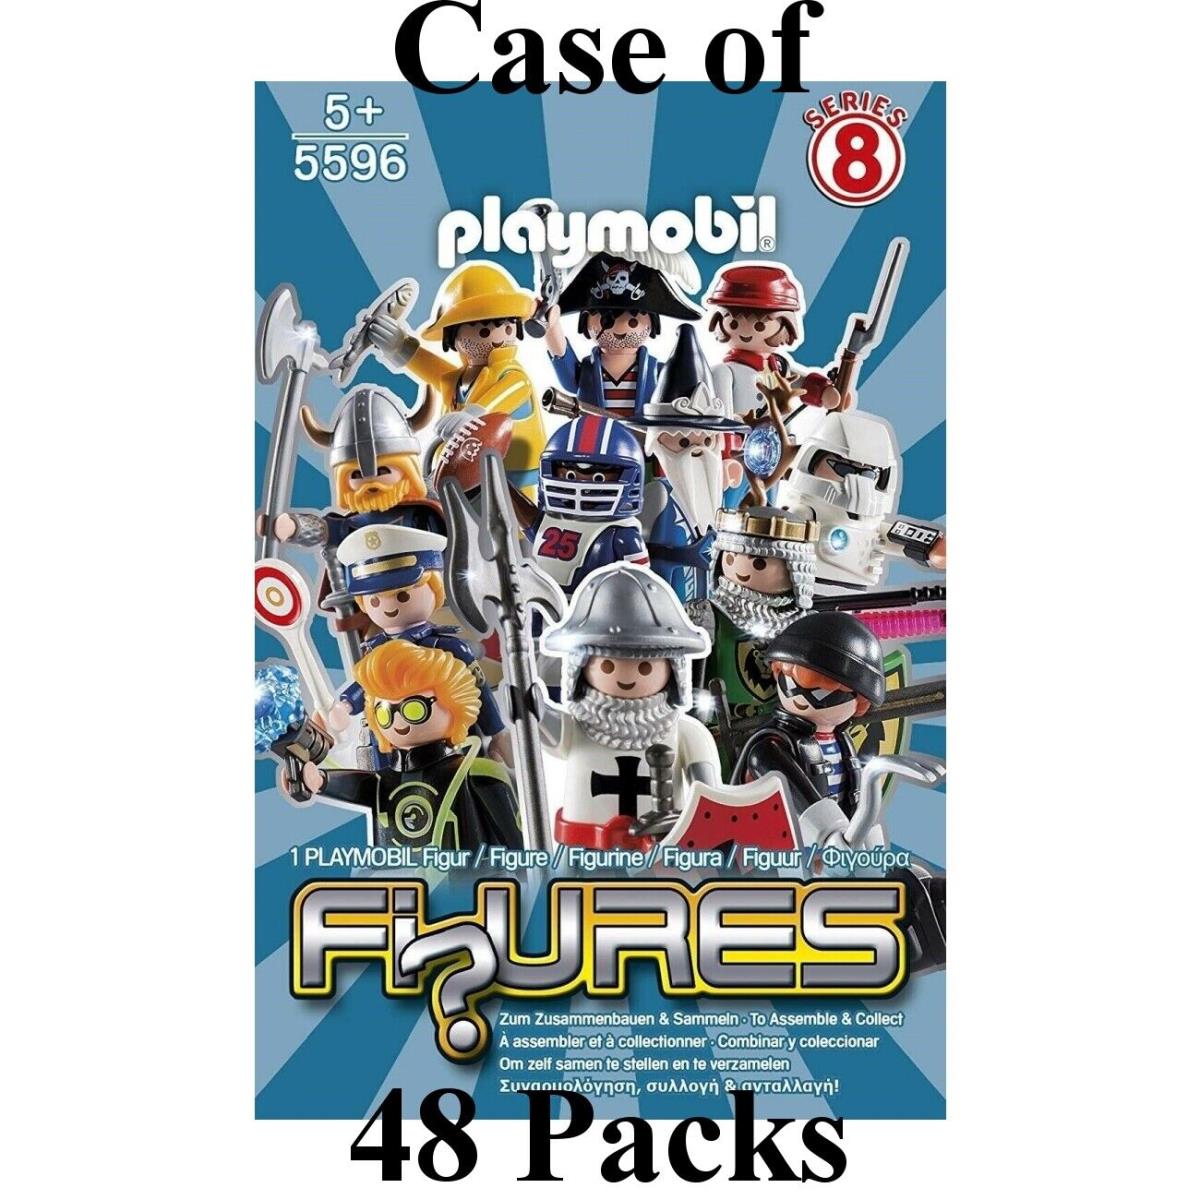 48 Packs Playmobil 5596 Series 8 Boys Mystery Figures Case of Fi Ures Box